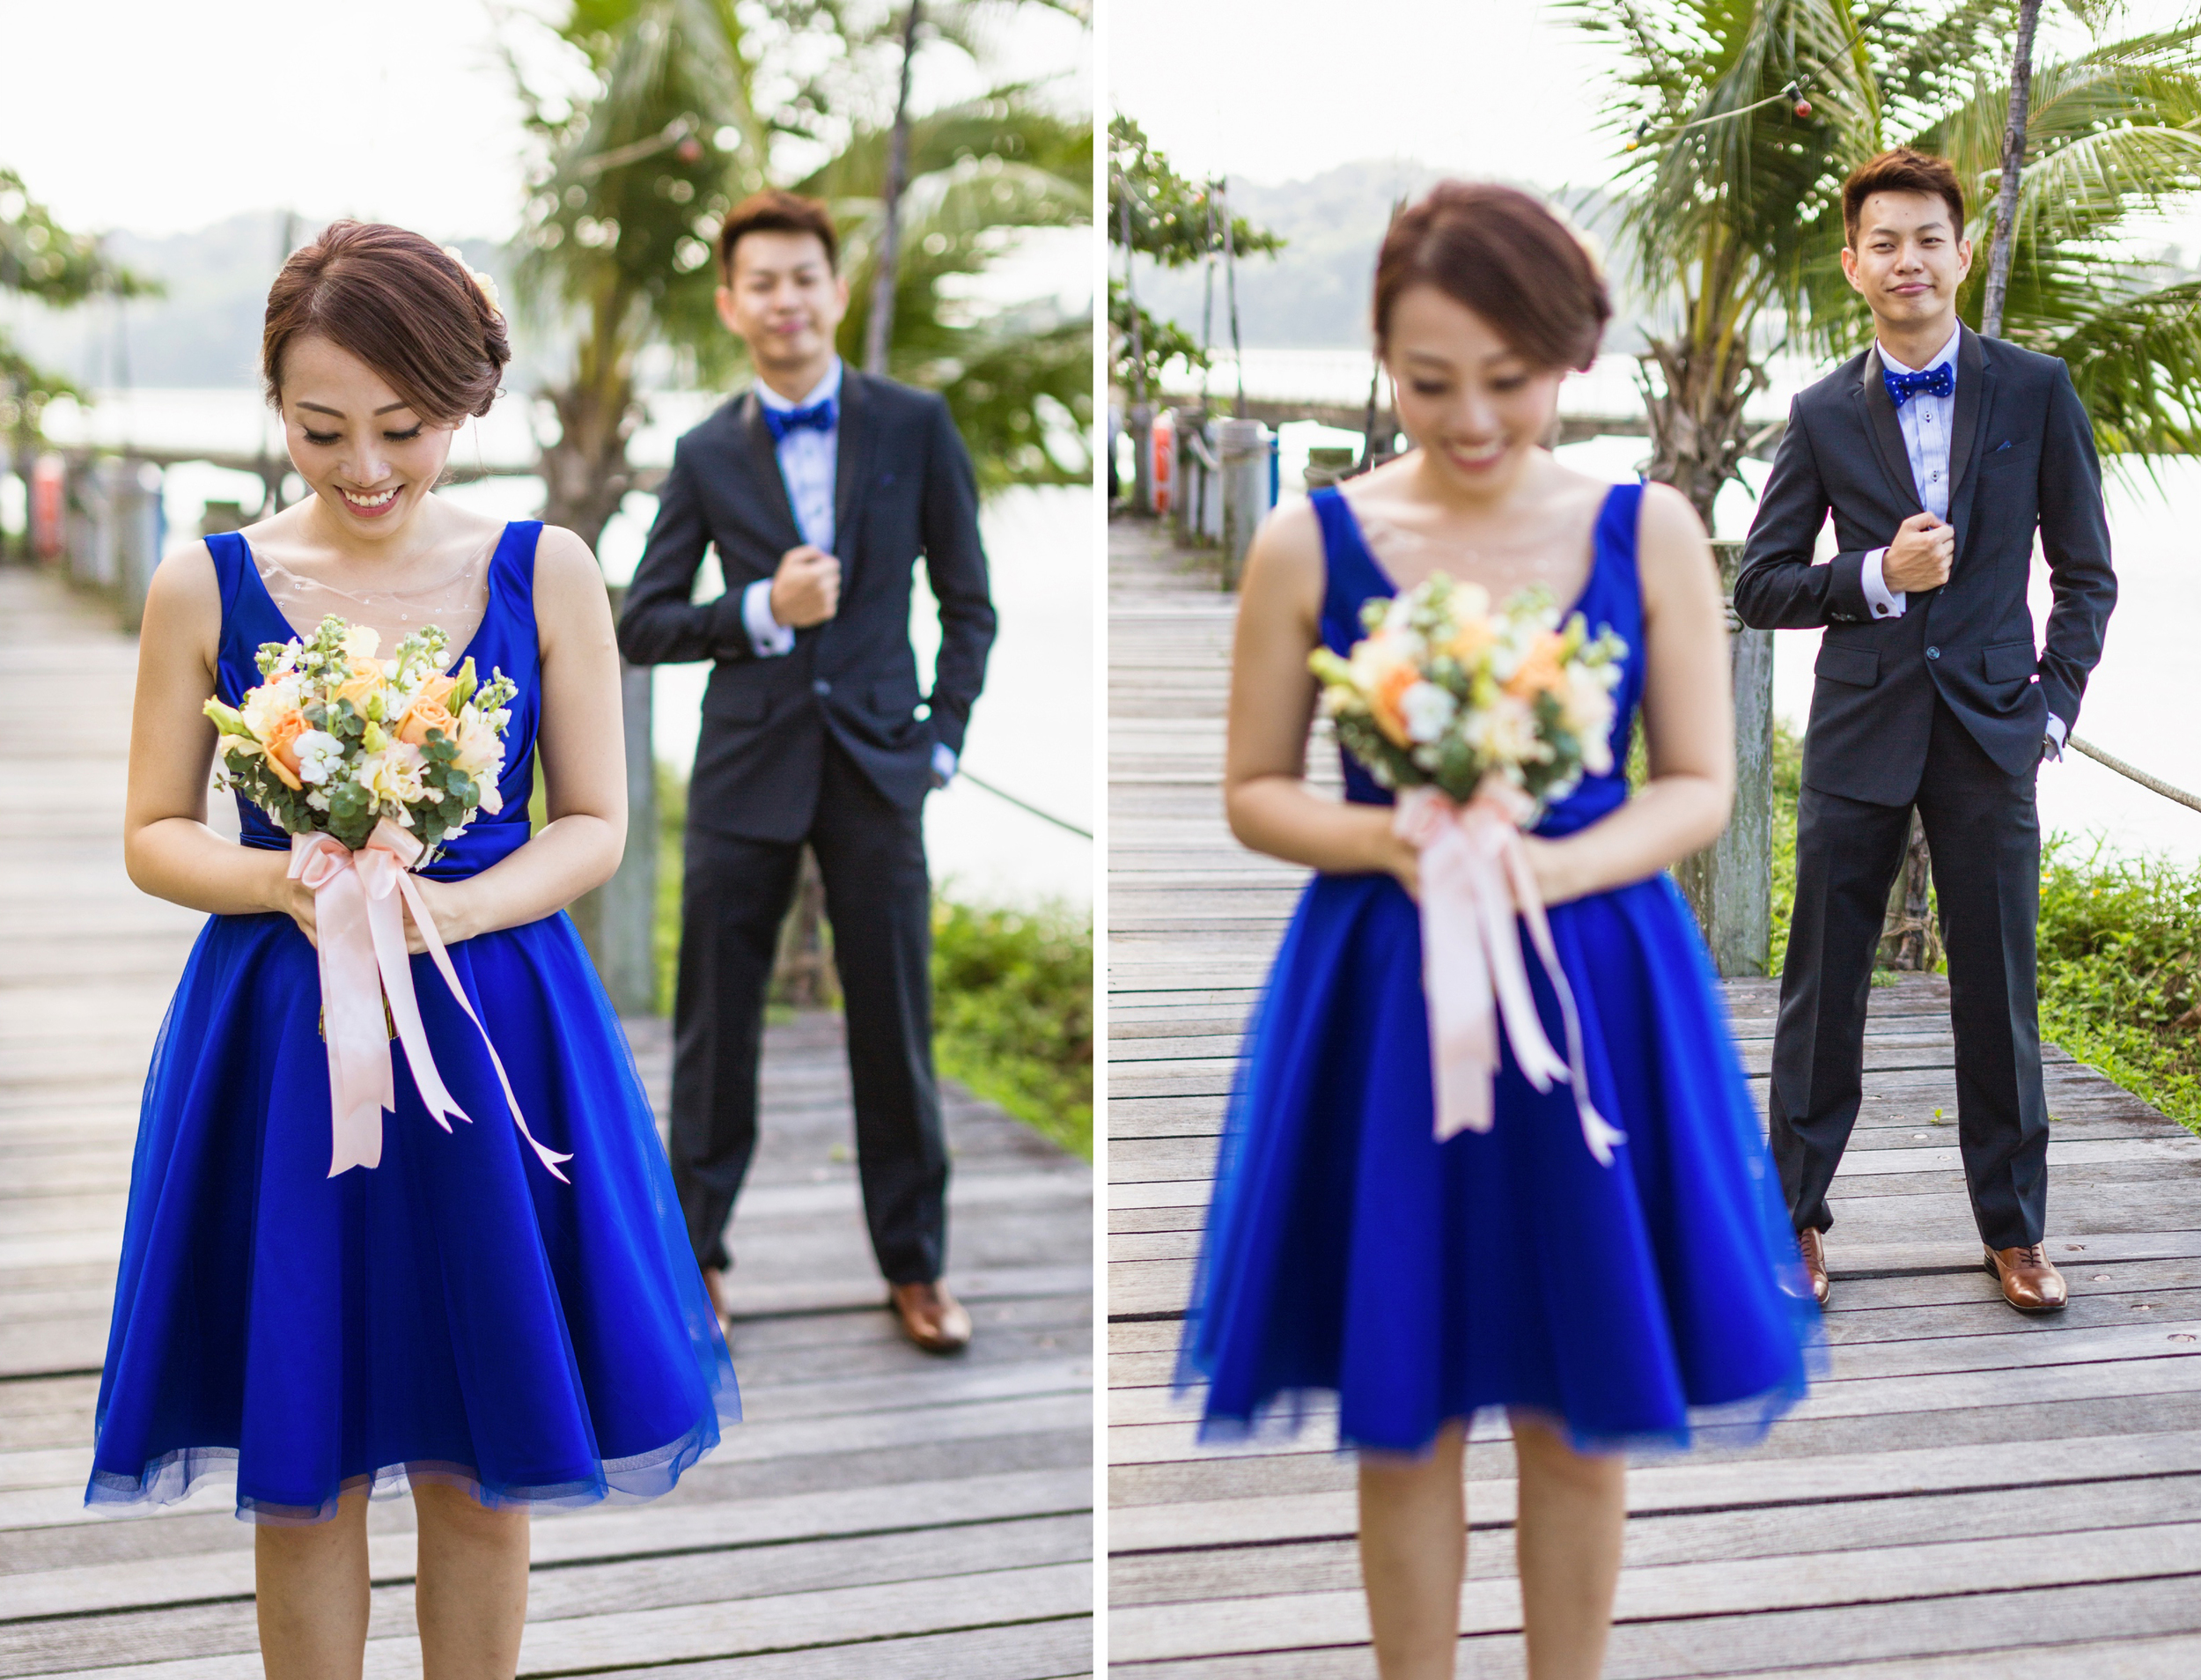 4 Reasons You Should Have An Outdoor Photo Shoot On Your Day Wedding